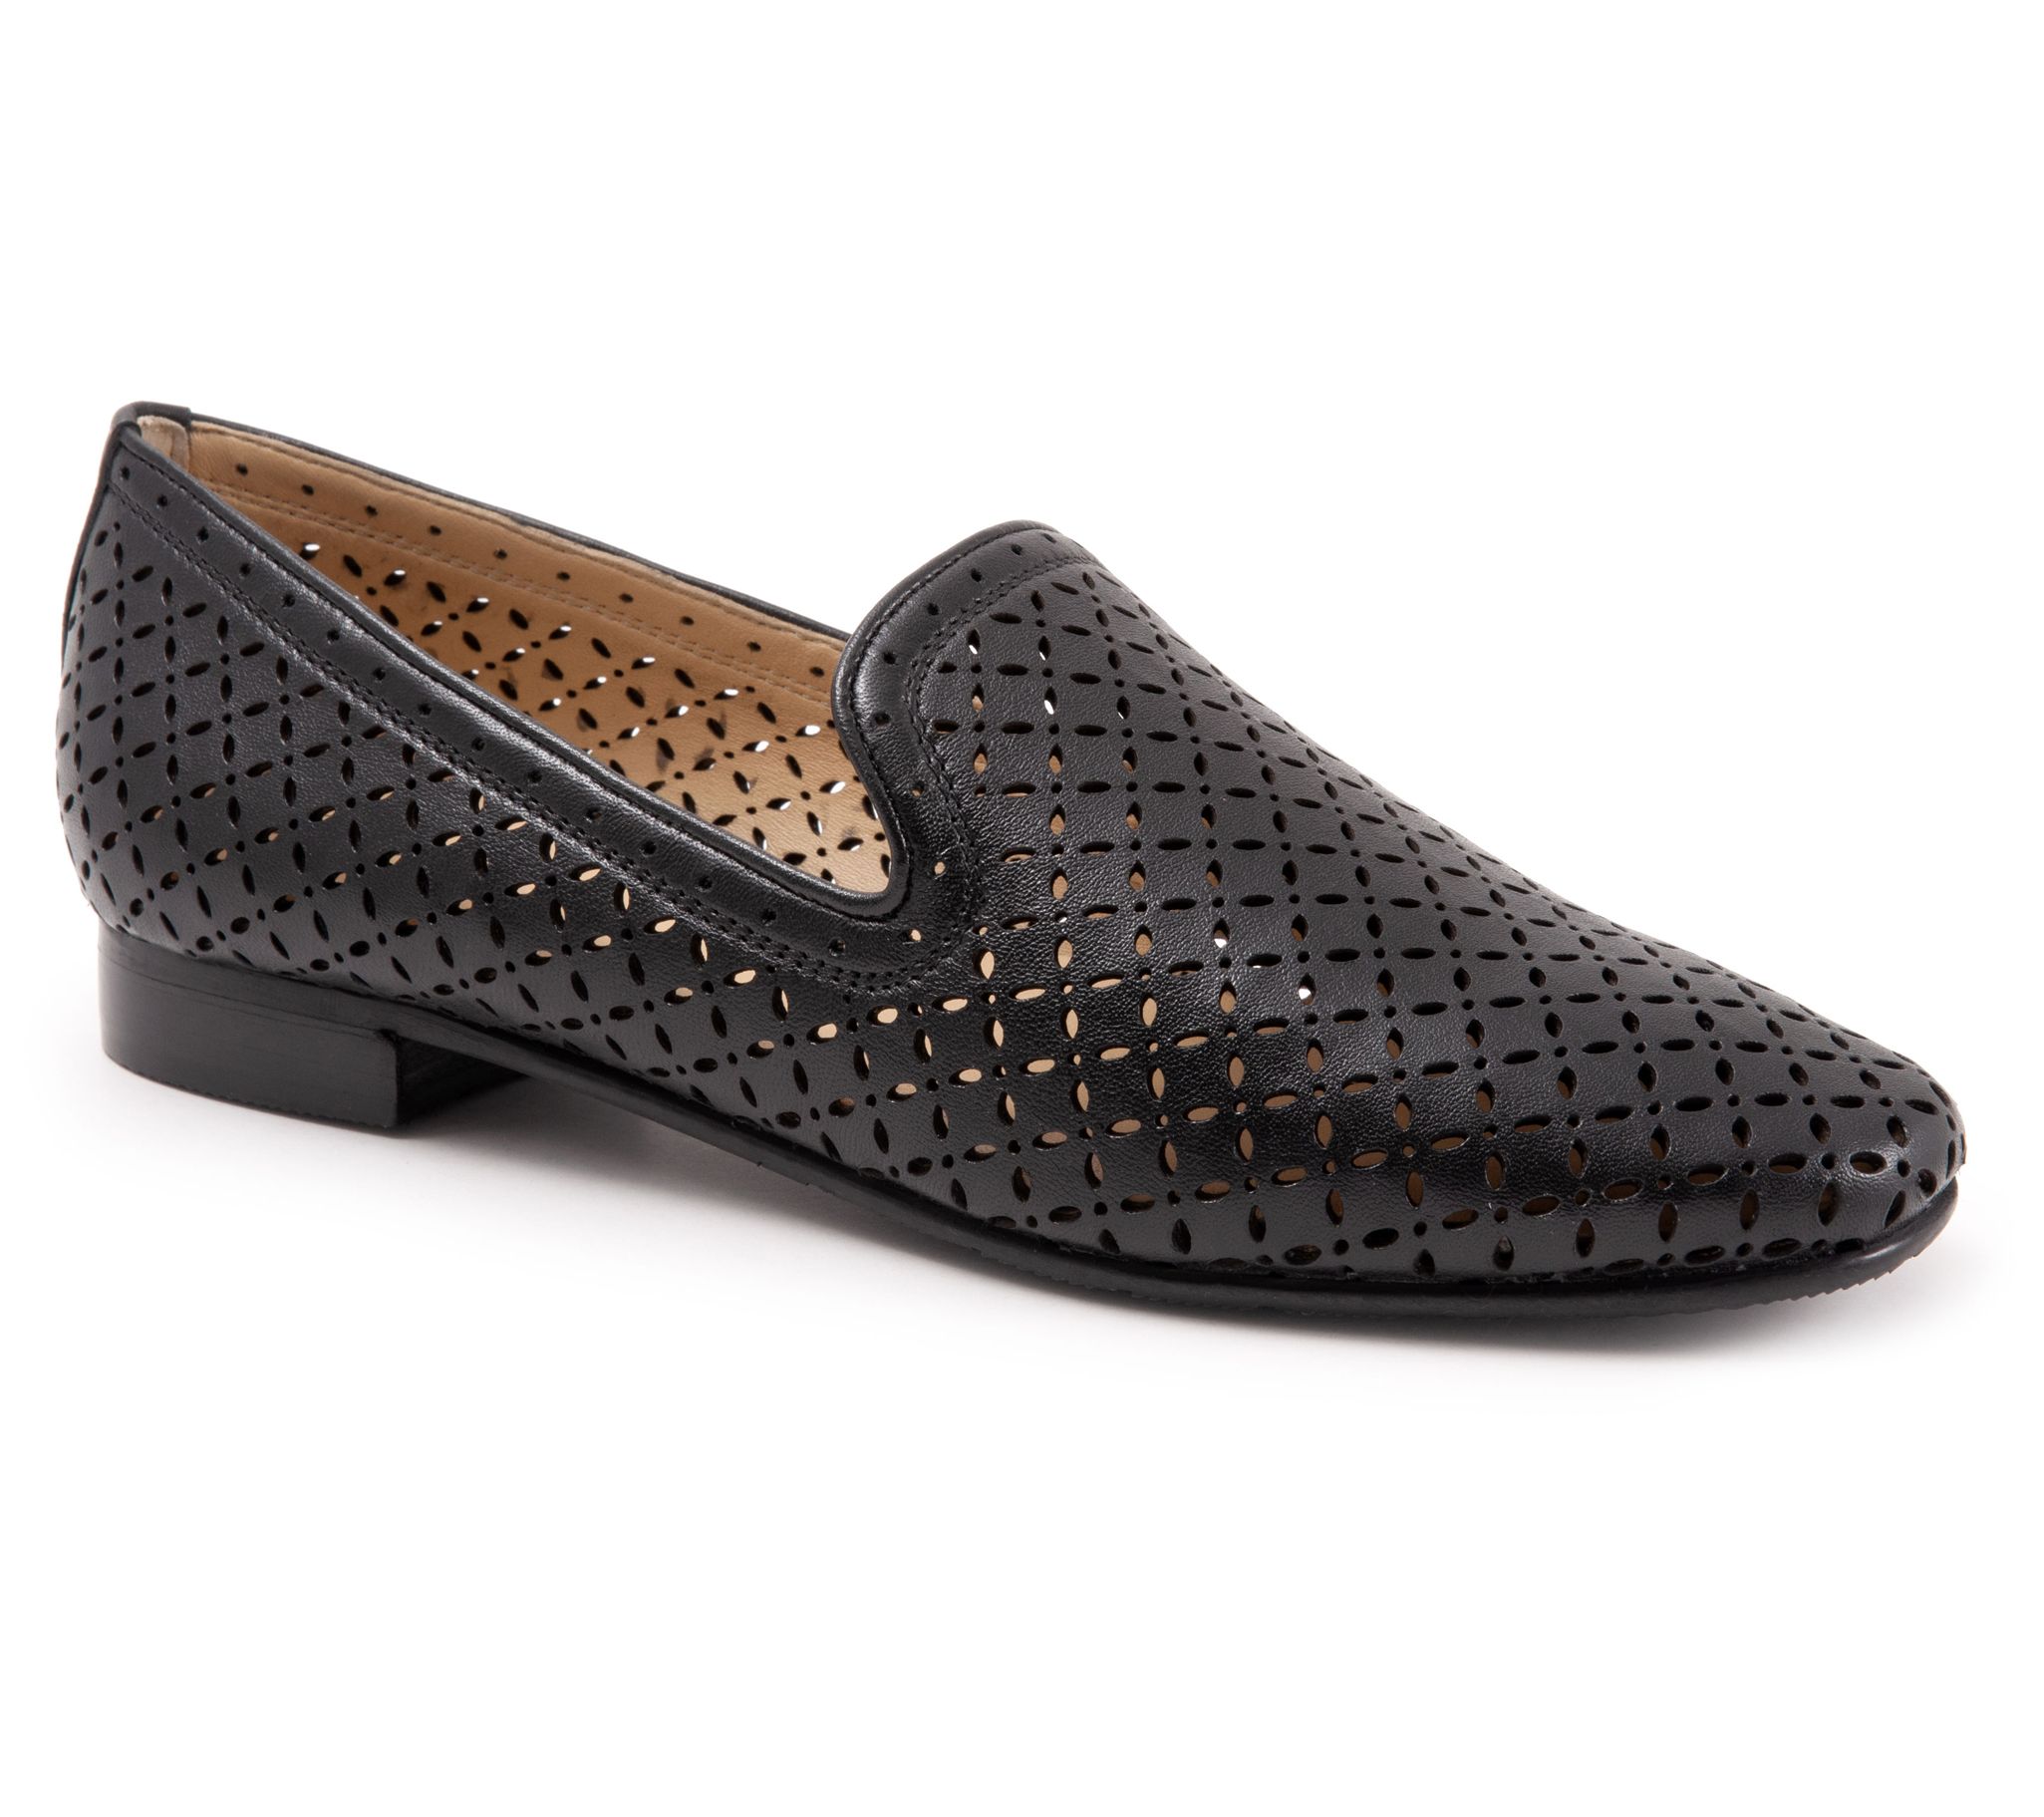 Trotters Women's Ginger Loafers - QVC.com